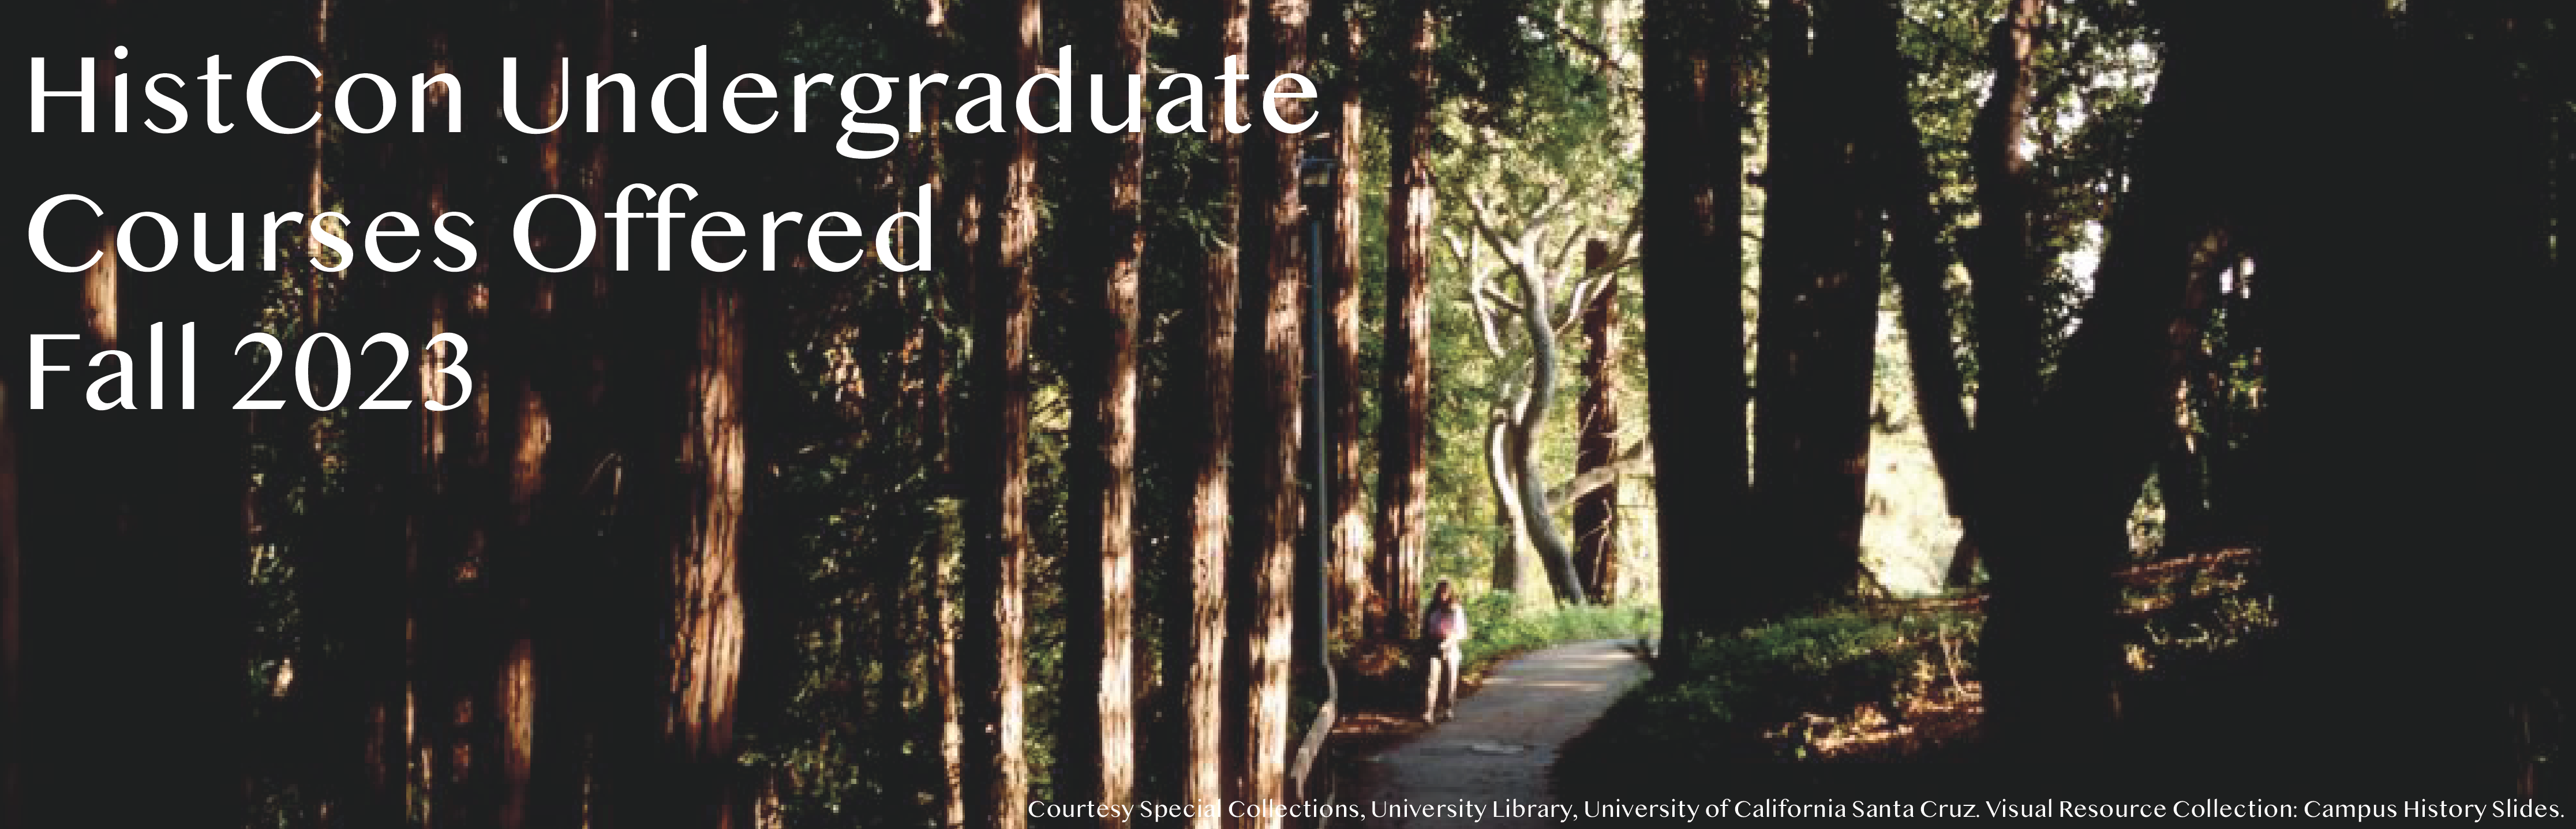 UC Santa Cruz campus grounds: student on a footpath through redwood trees, April 1988. Nikolay Zurek. © Courtesy Special Collections, University Library, University of California Santa Cruz. Visual Resource Collection: Campus History Slides.